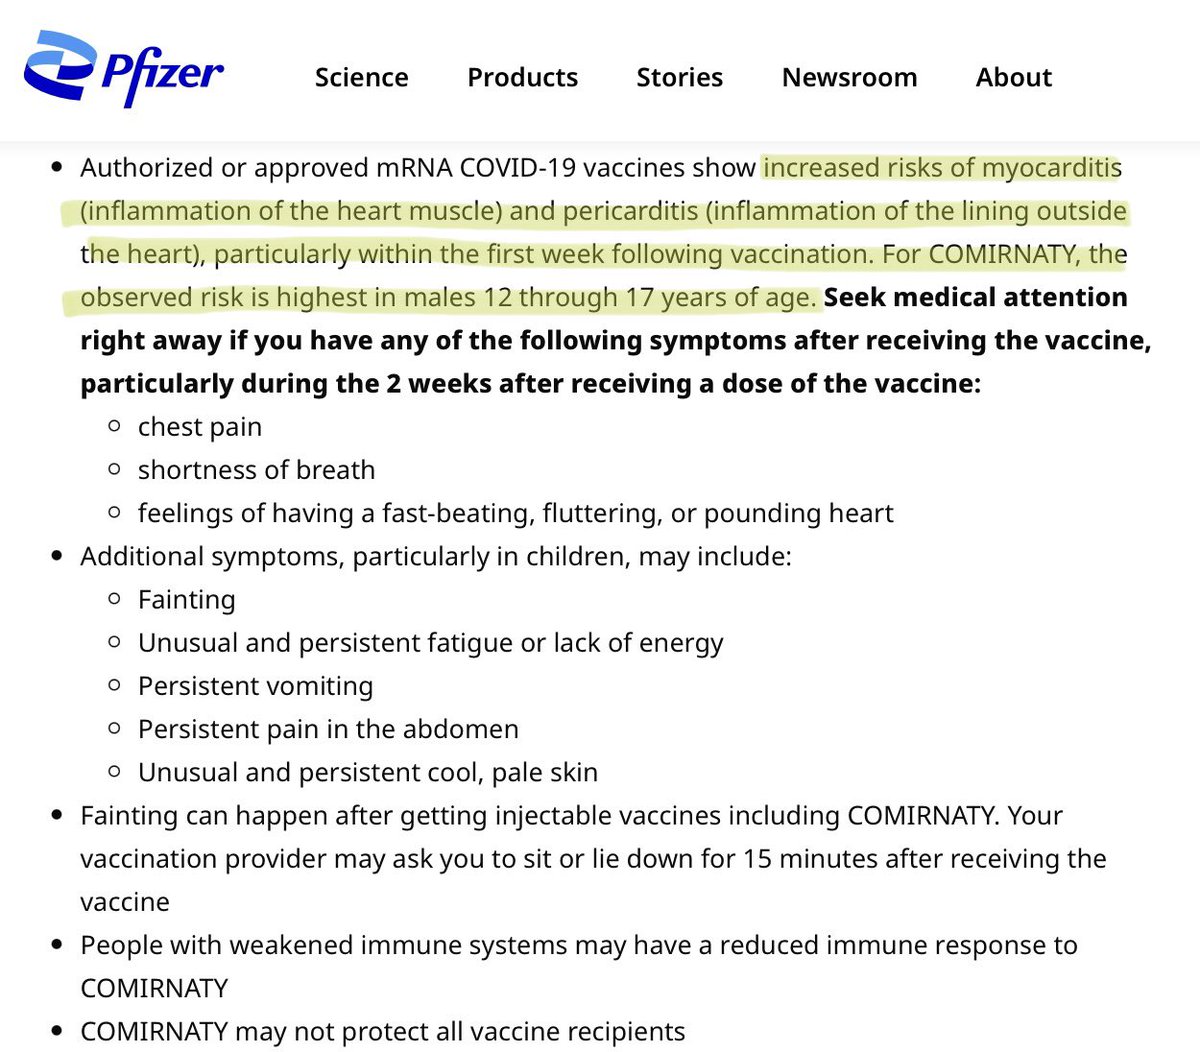 NEW PFIZER GUIDANCE: 'Authorized or approved mRNA COVID-19 vaccines show increased risks of myocarditis (inflammation of the heart muscle) and pericarditis (inflammation of the lining outside the heart), particularly within the first week following vaccination. For COMIRNATY, the…